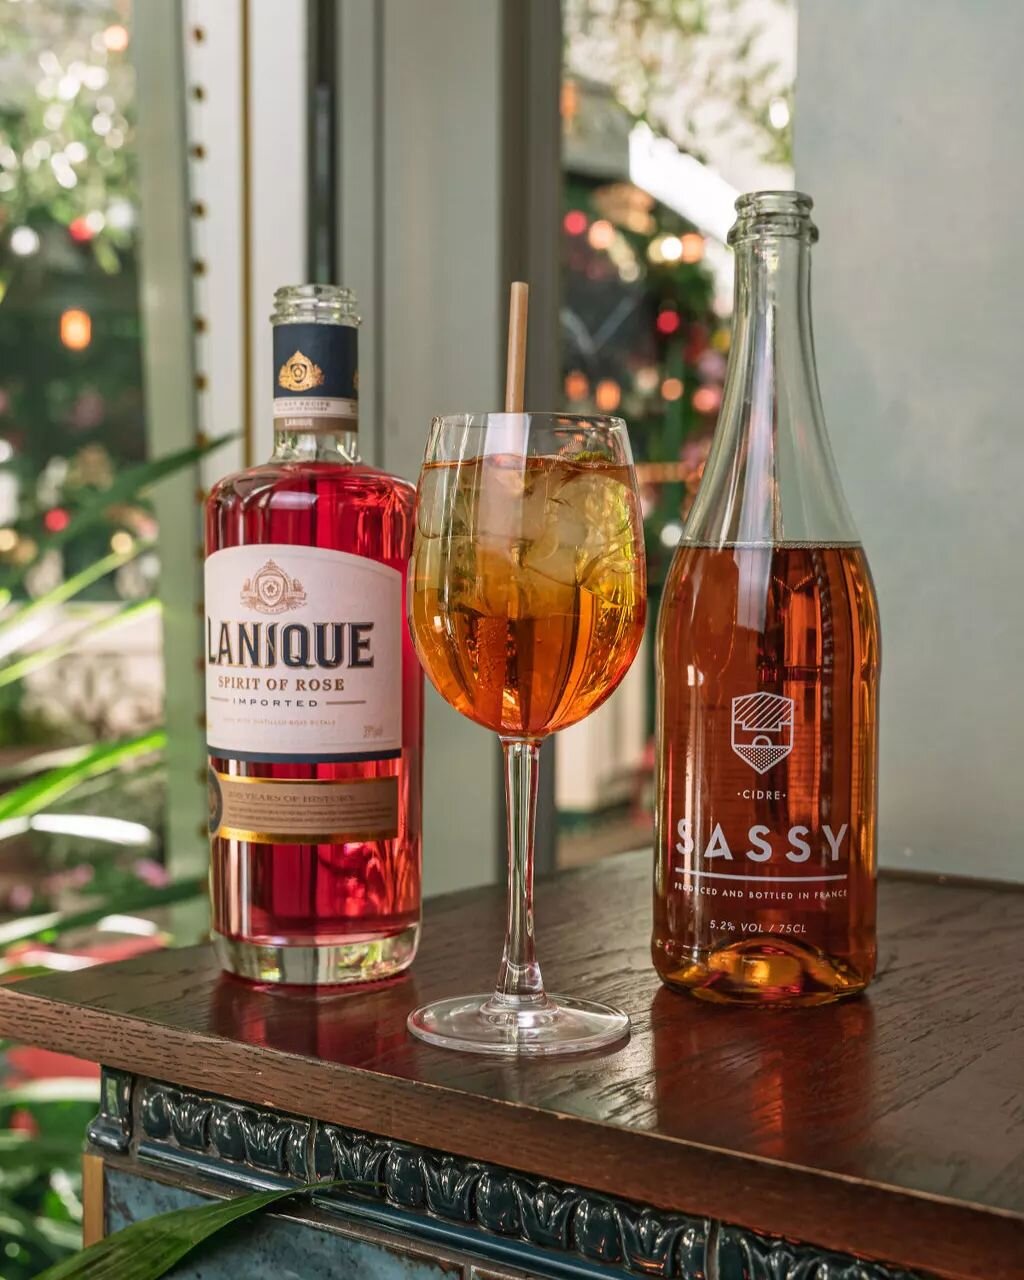 The perfect serve for this Bank Holiday Monday, Lanique and Apple Rose Spritz  @flightclubdarts ✨

125ml of @maisonsassy 🍎
25ml Lanique 🌹